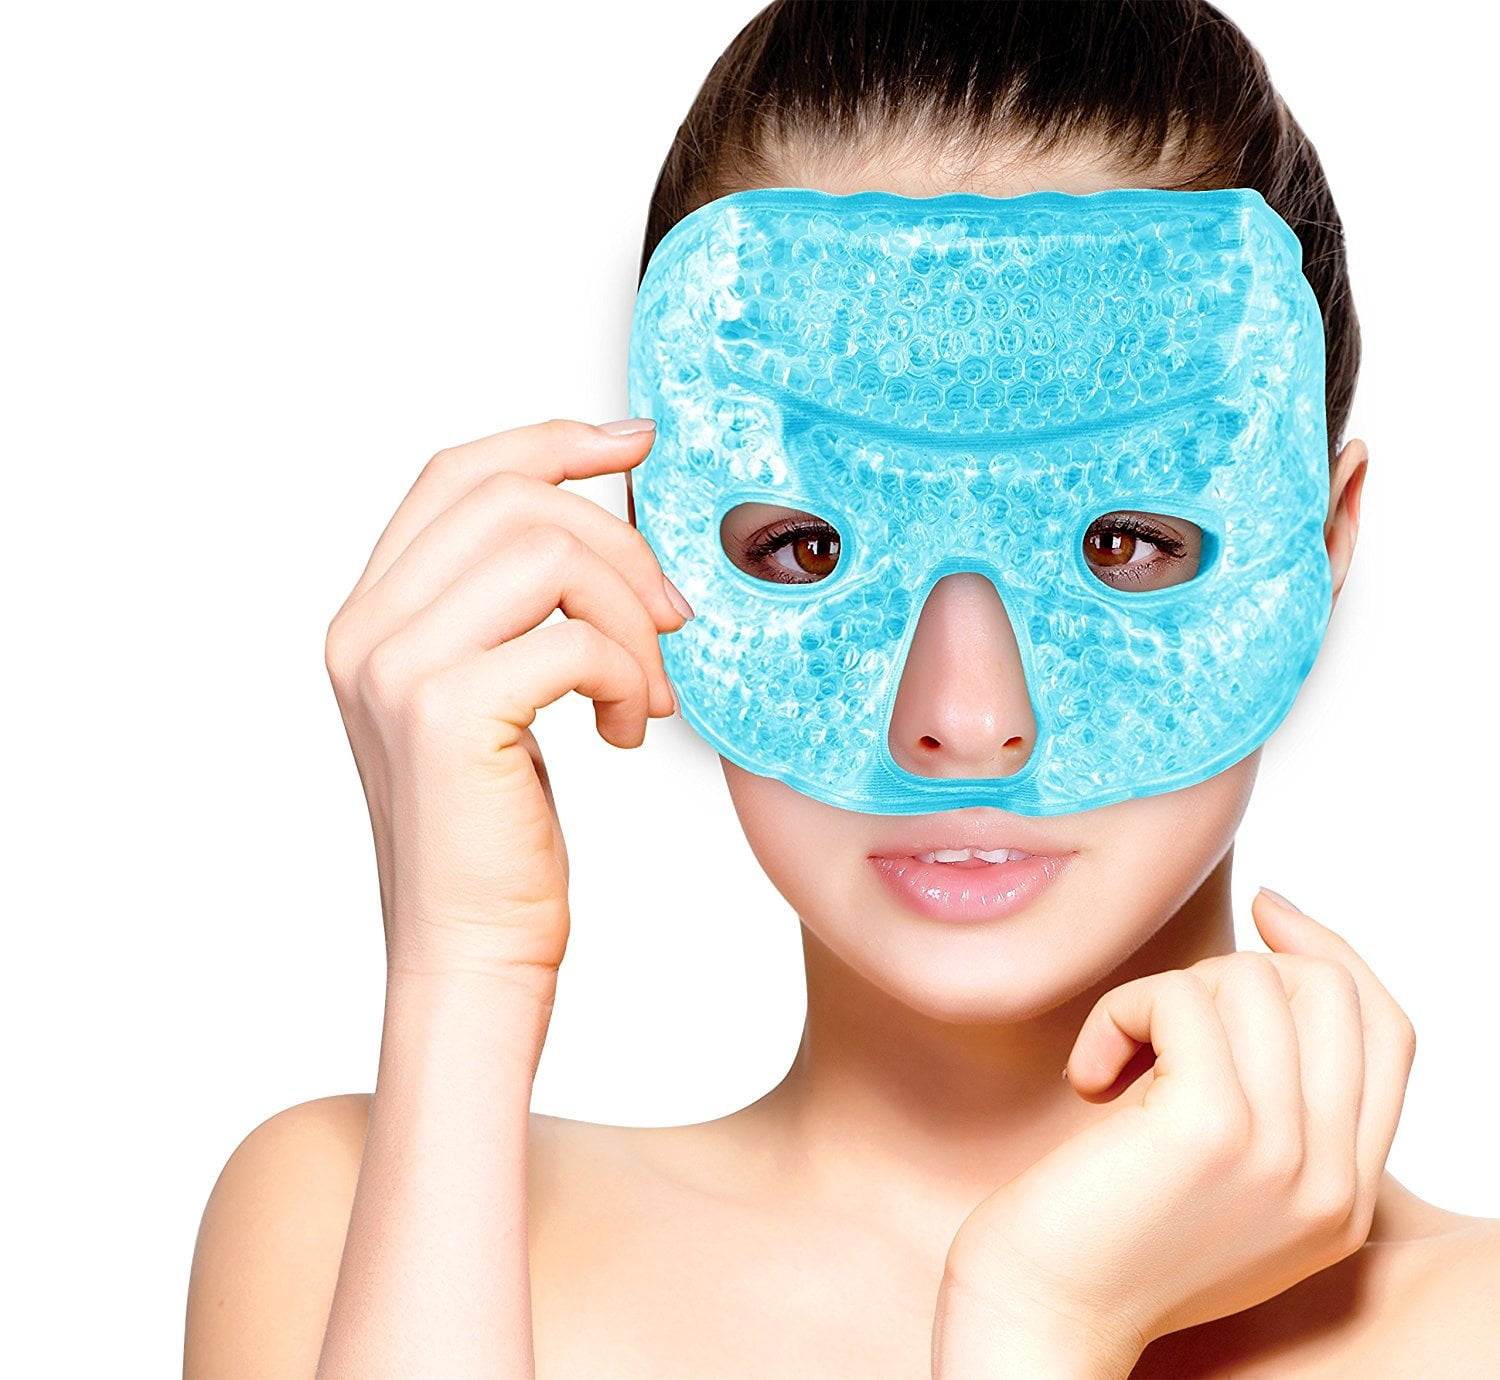 Luxury Face Cold Mask - Ice Cold Gel Pack with a Soft Cotton Backing. Premium Quality Cooling ...